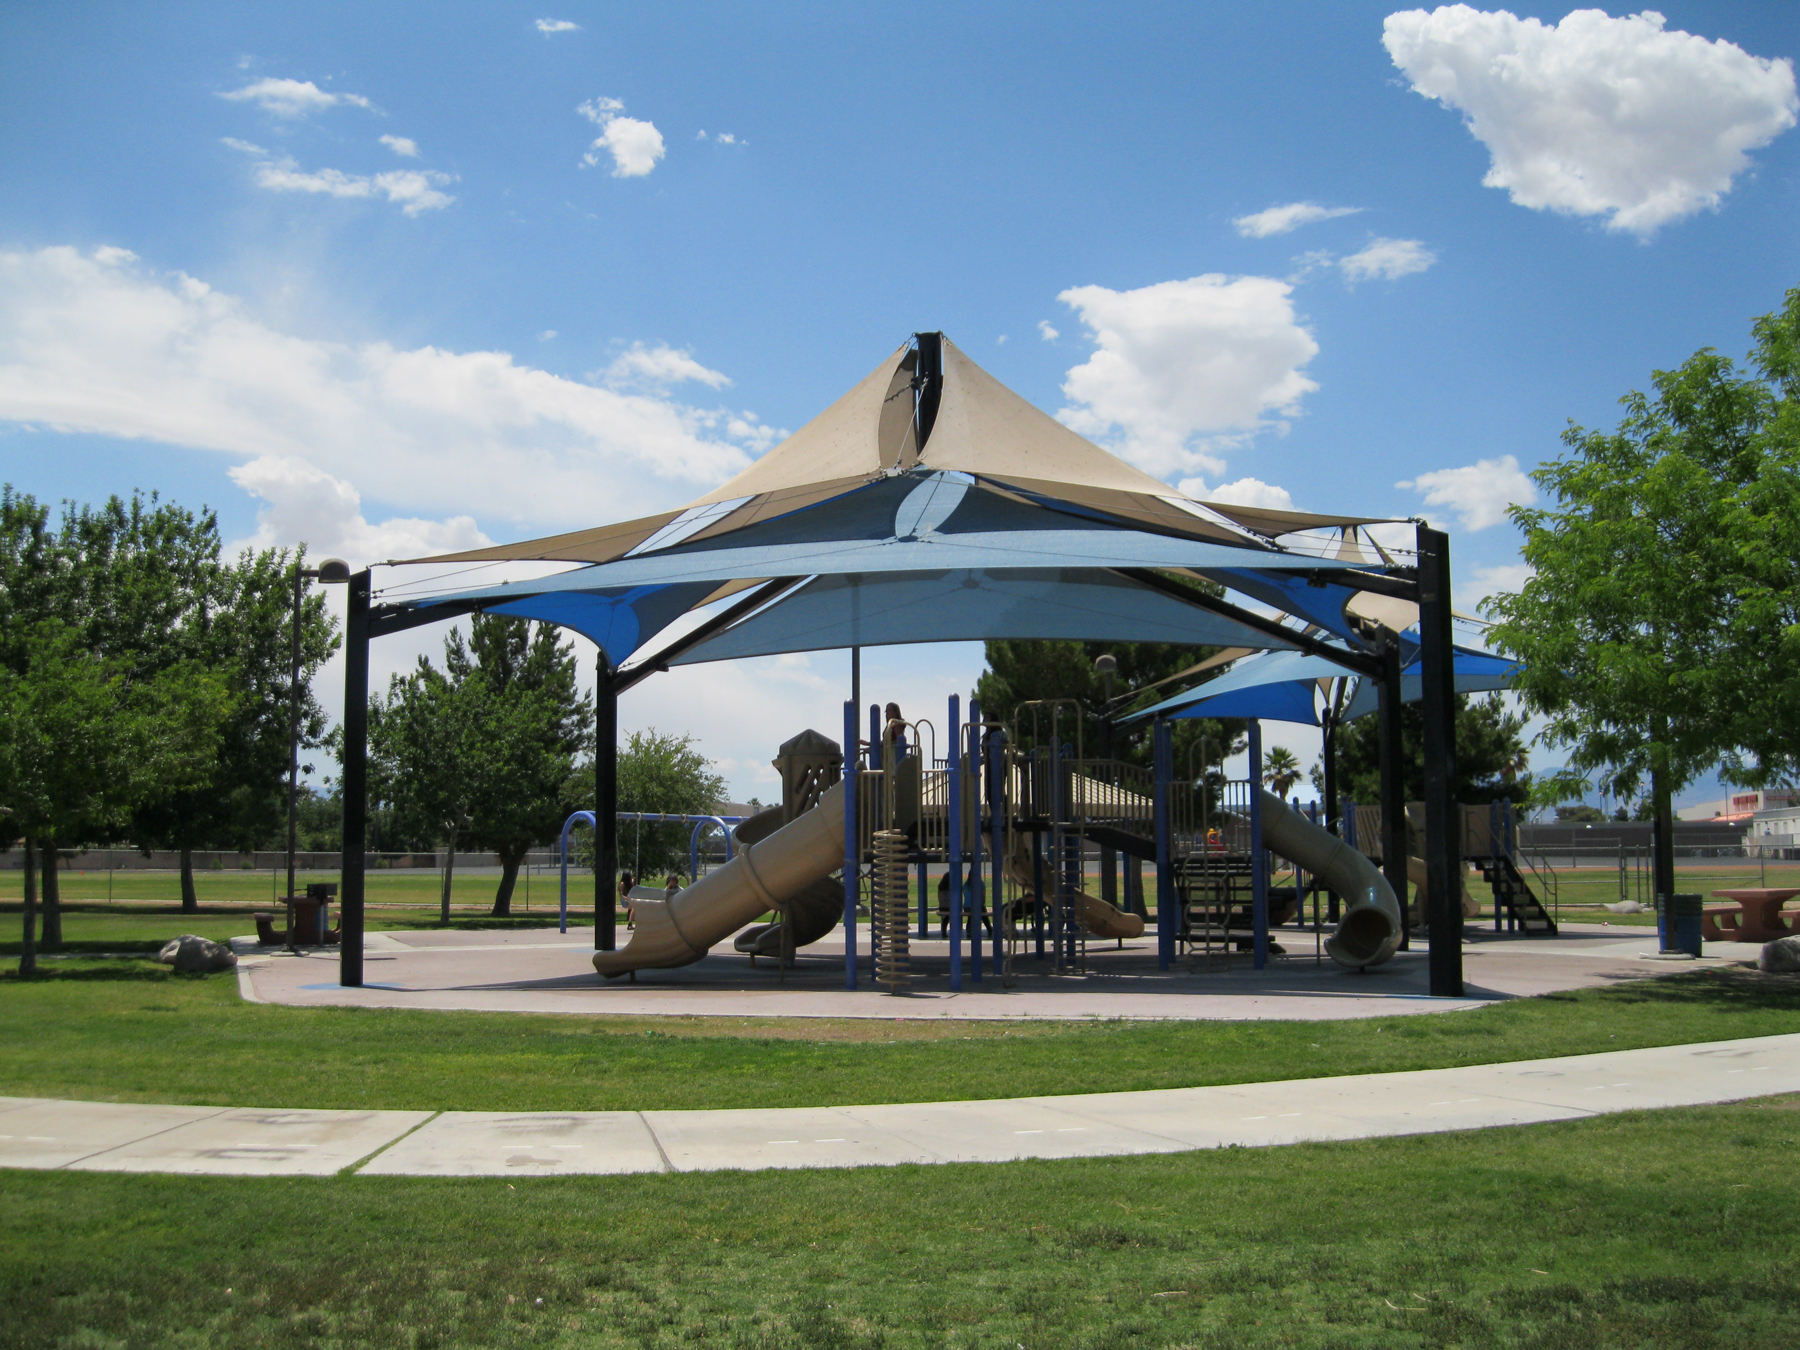 large sun shade covering outdoor playground